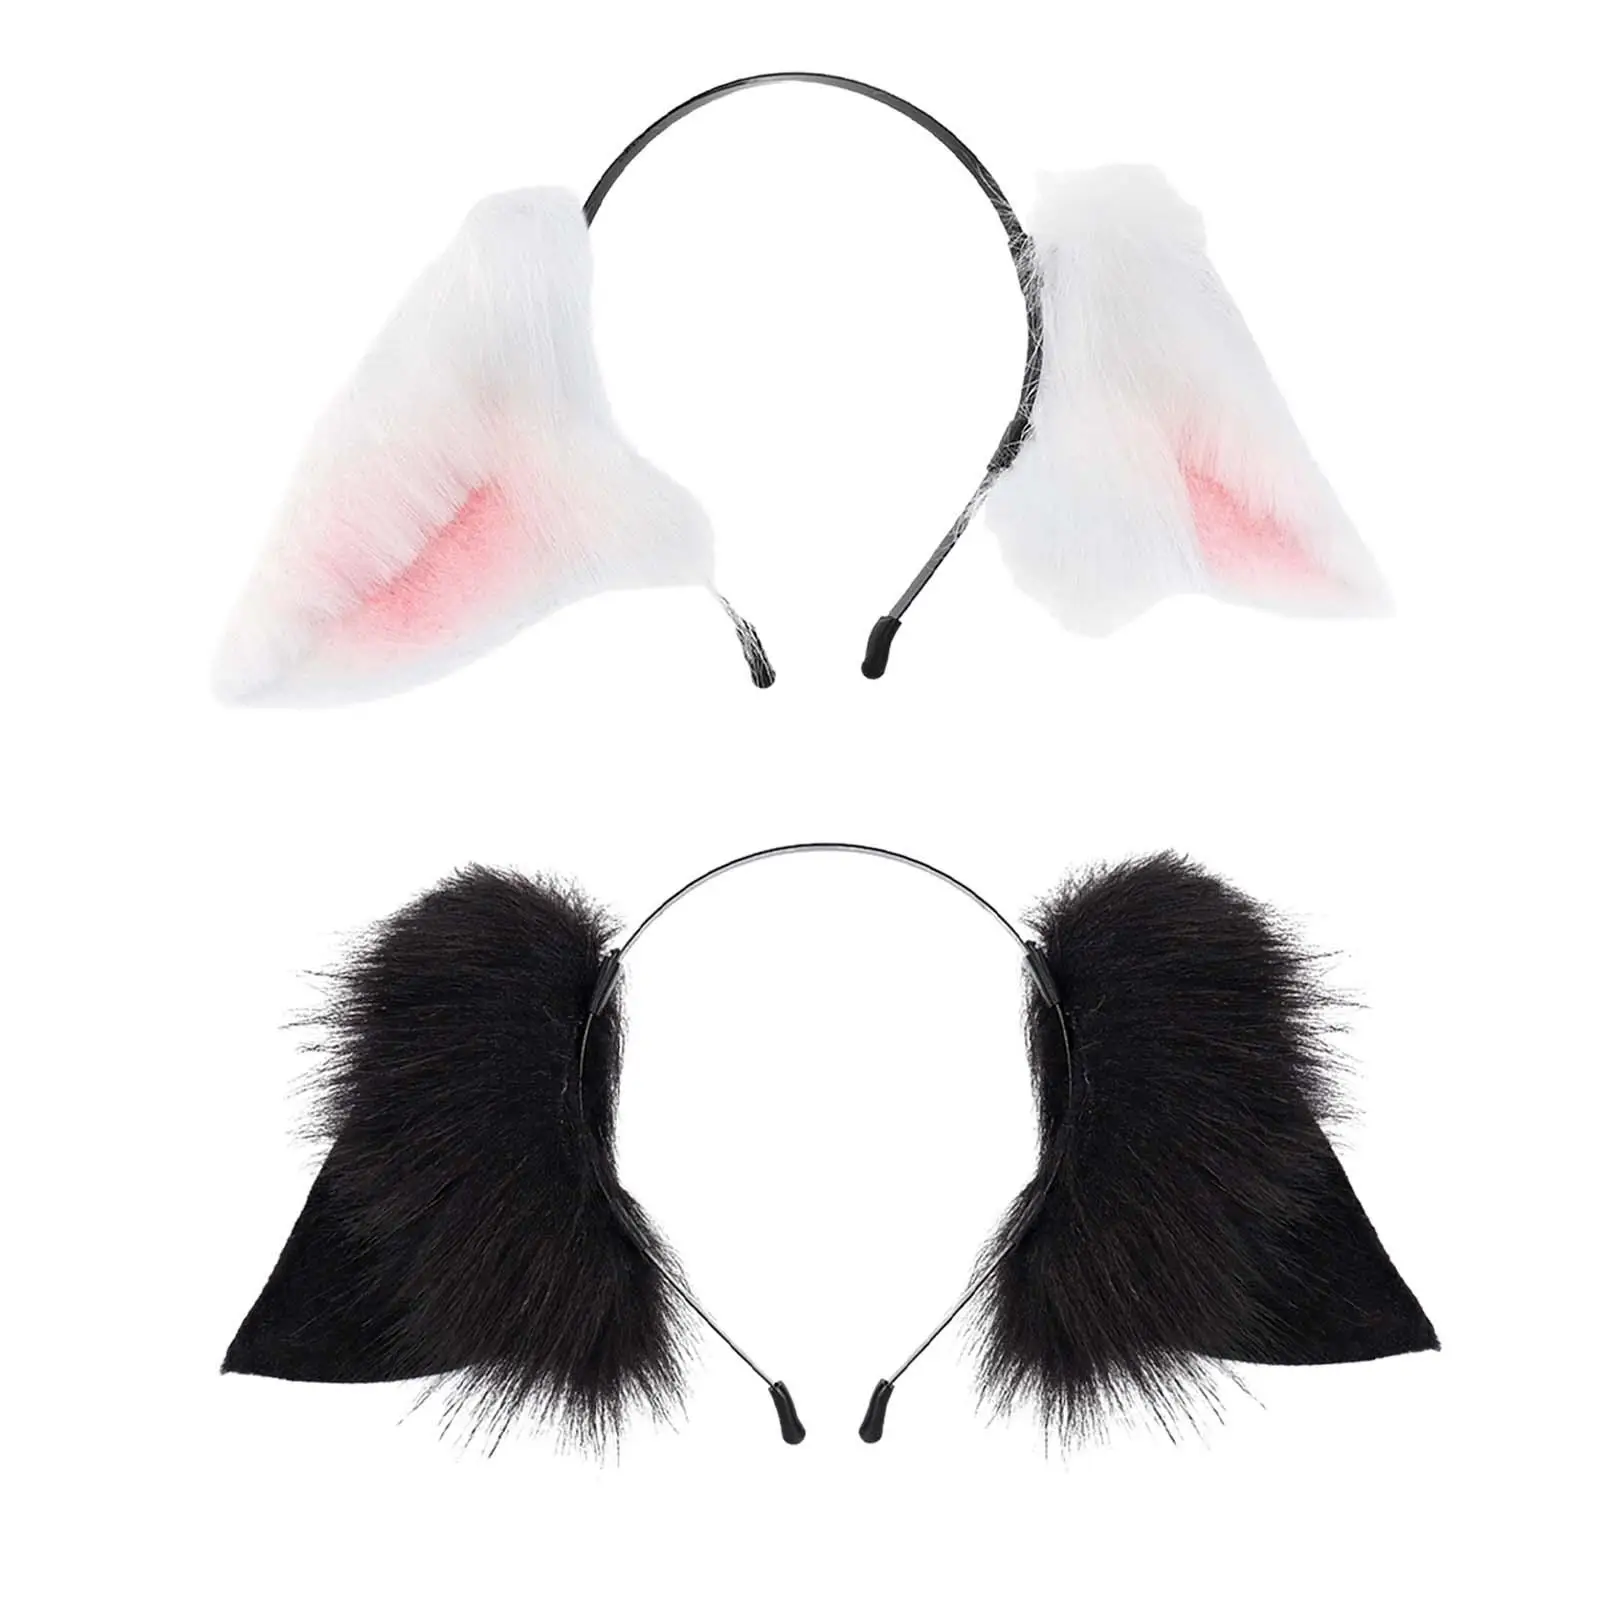 

Animal Ears Headband Fancy Dress Cosplay Adult Animal Ears Hair Hoop for Party Stage Performances Role Play Masquerade Carnival